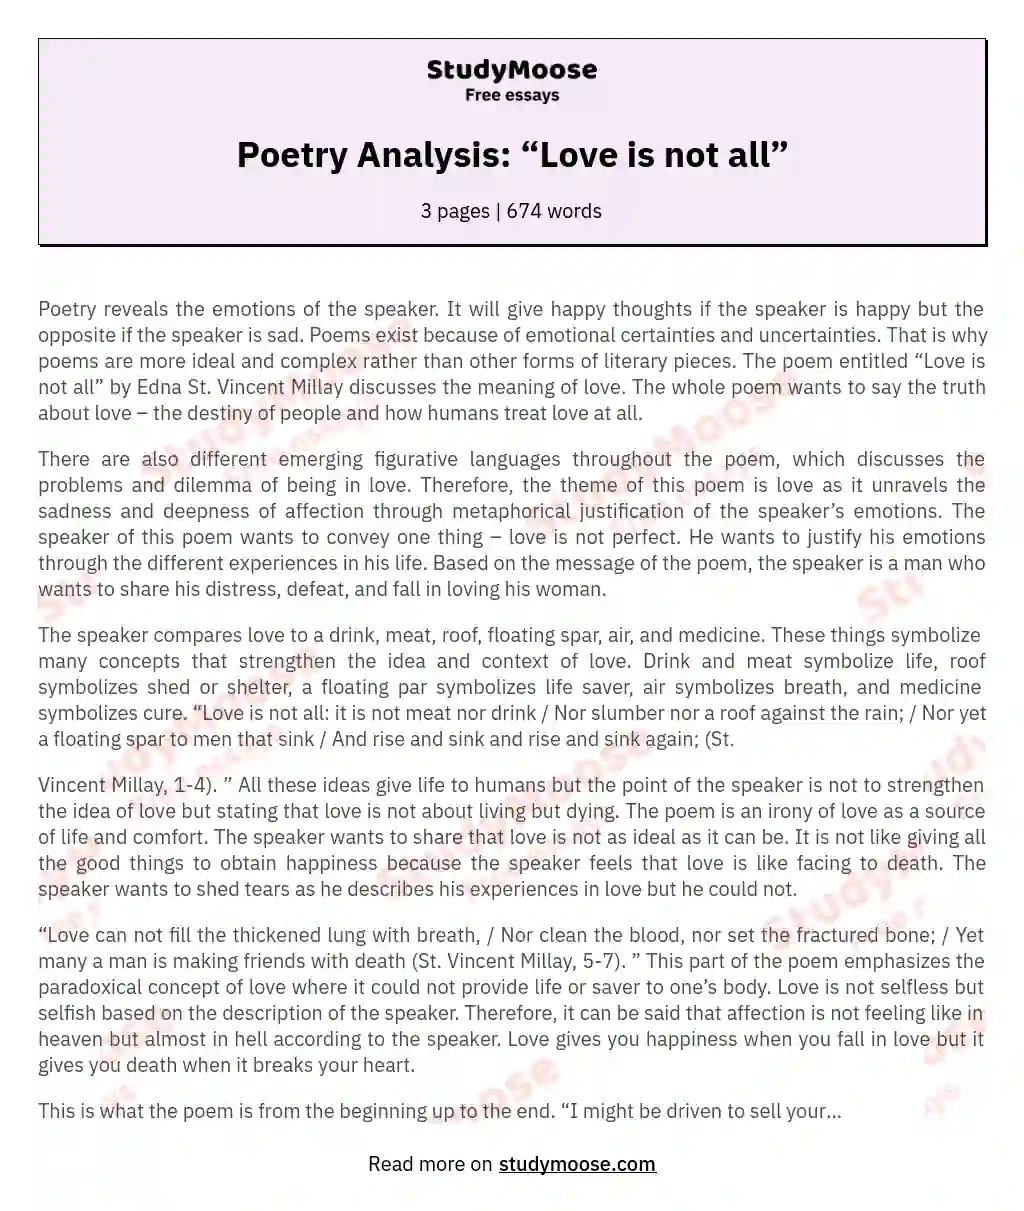 Poetry Analysis: “Love is not all” essay